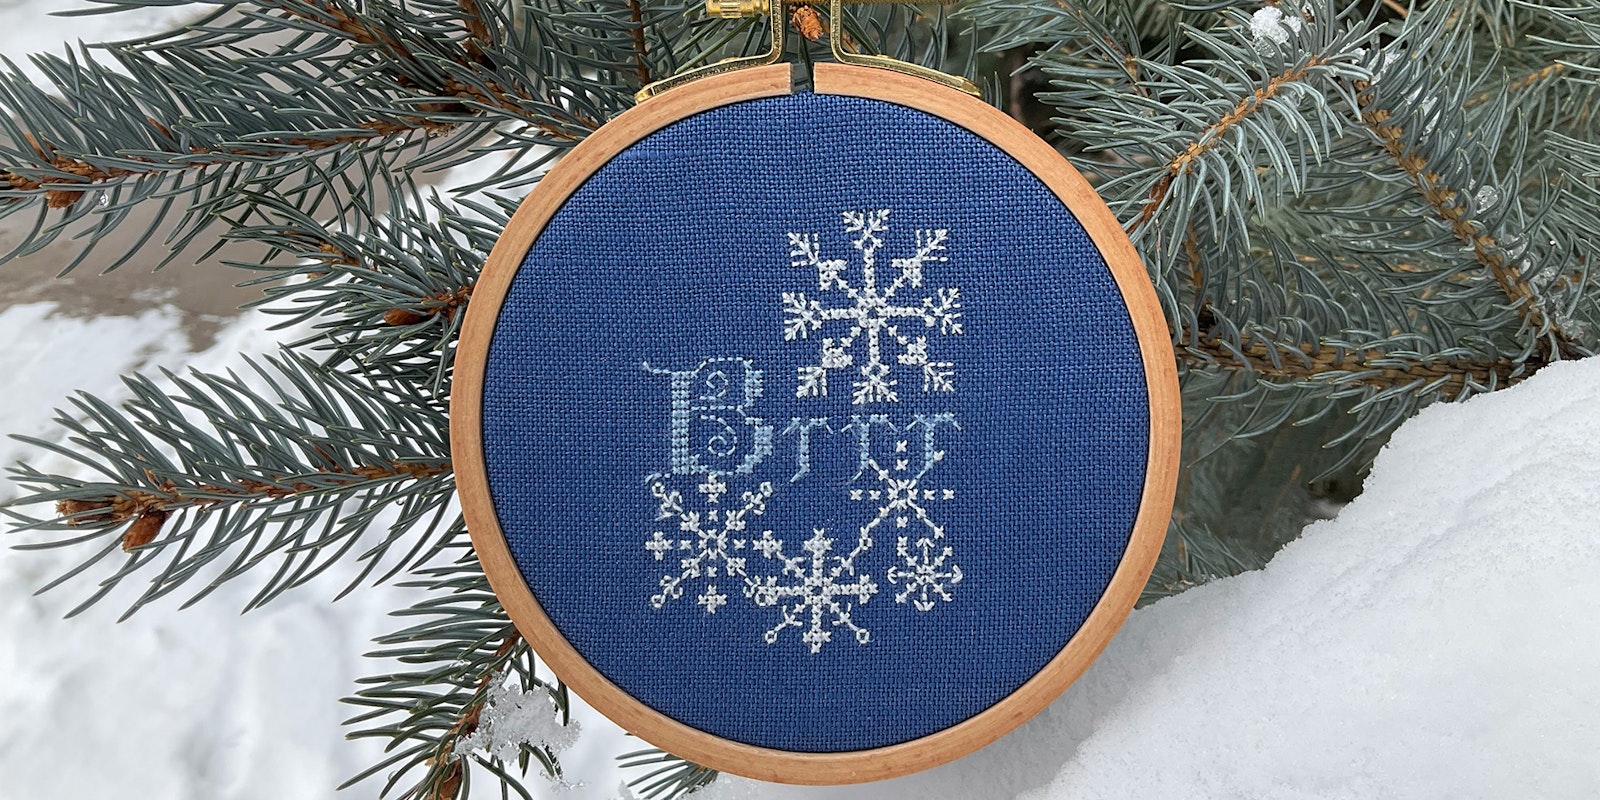 Last Minute Gifts - 12 Days of Christmas Round Ups - Stitches n Scraps